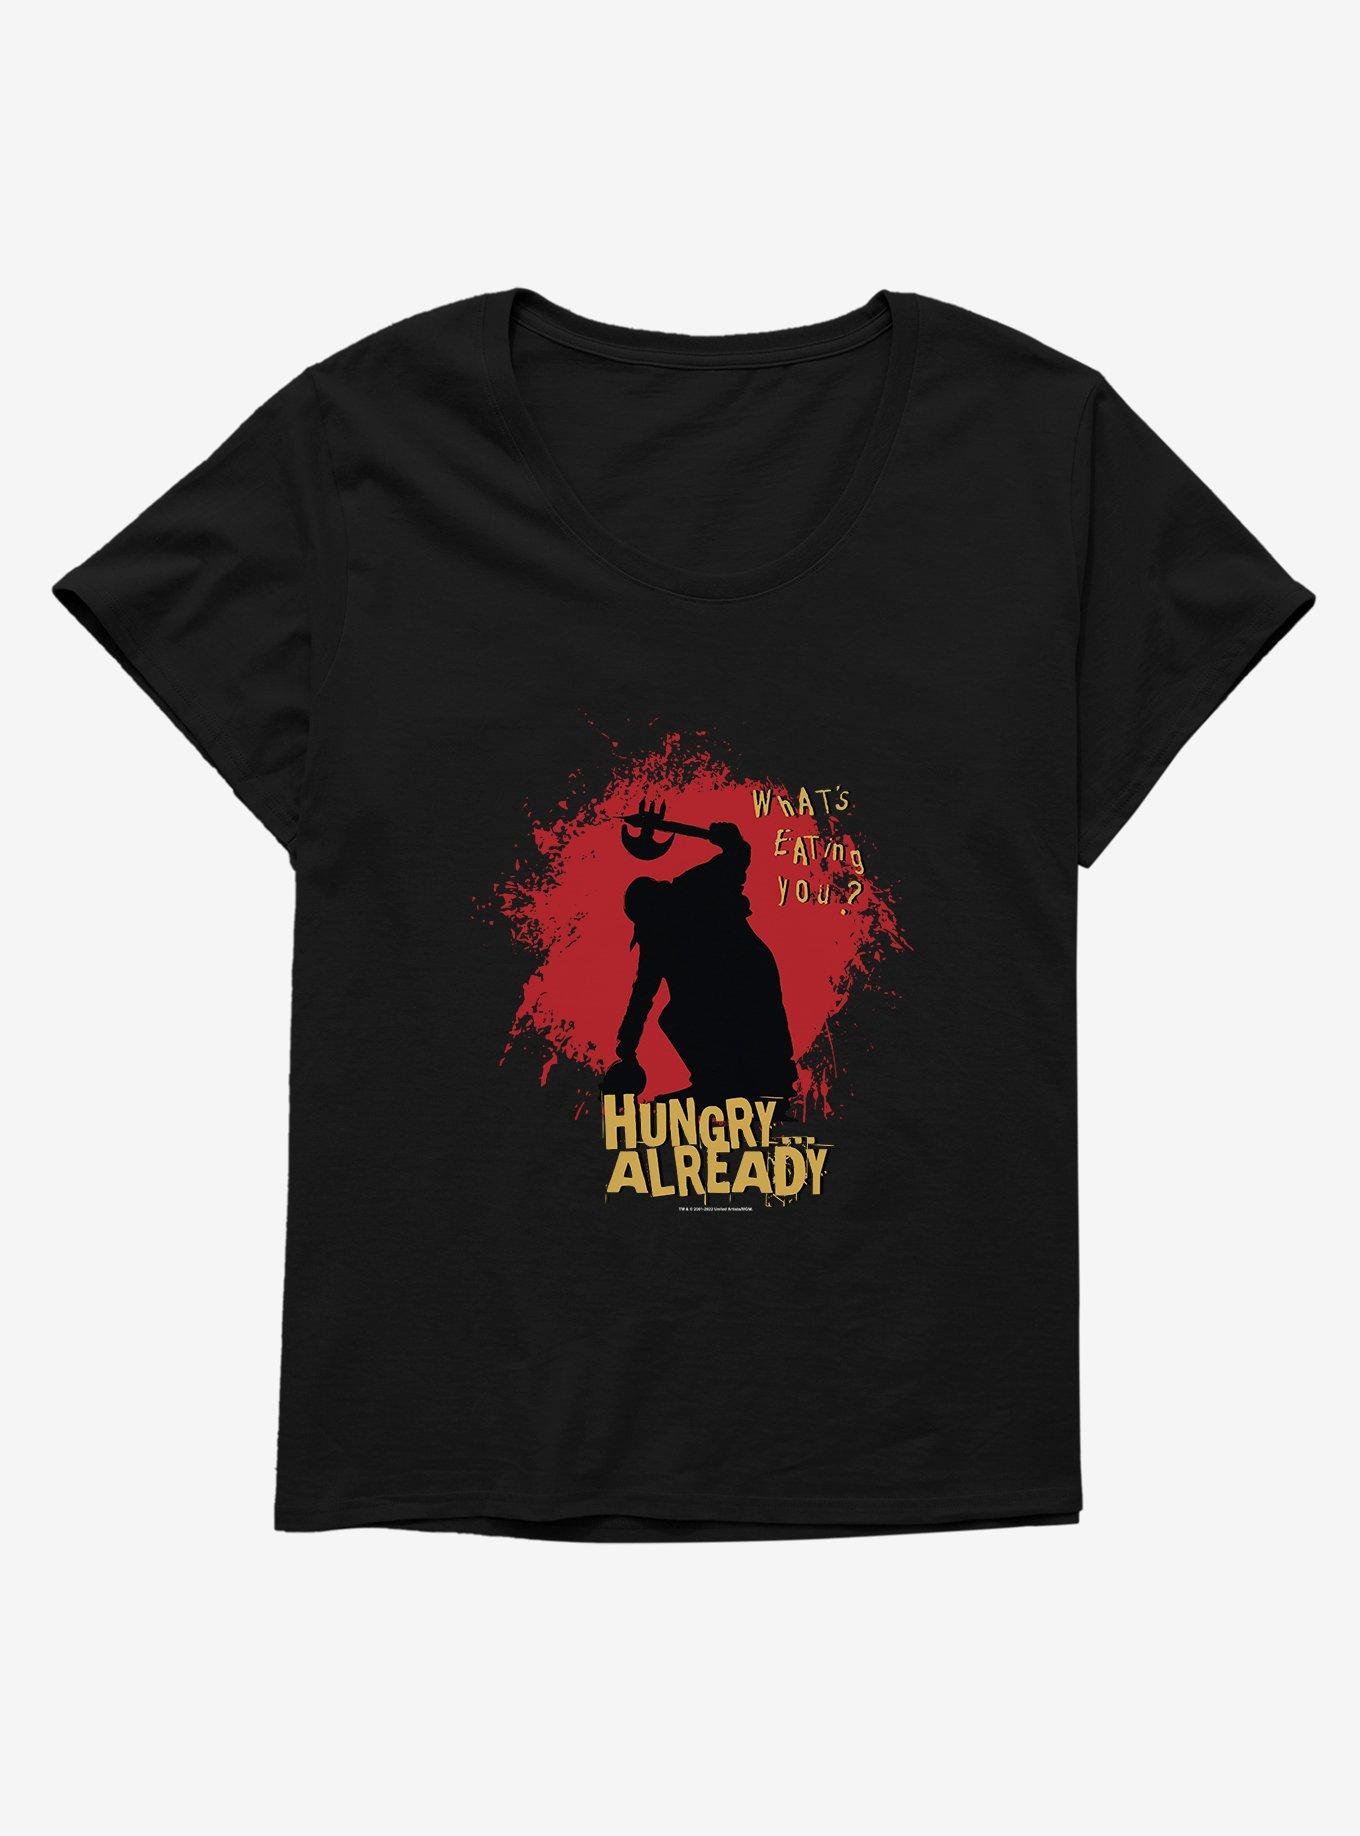 Jeepers Creepers Hungry? Already Girls T-Shirt Plus Size, BLACK, hi-res